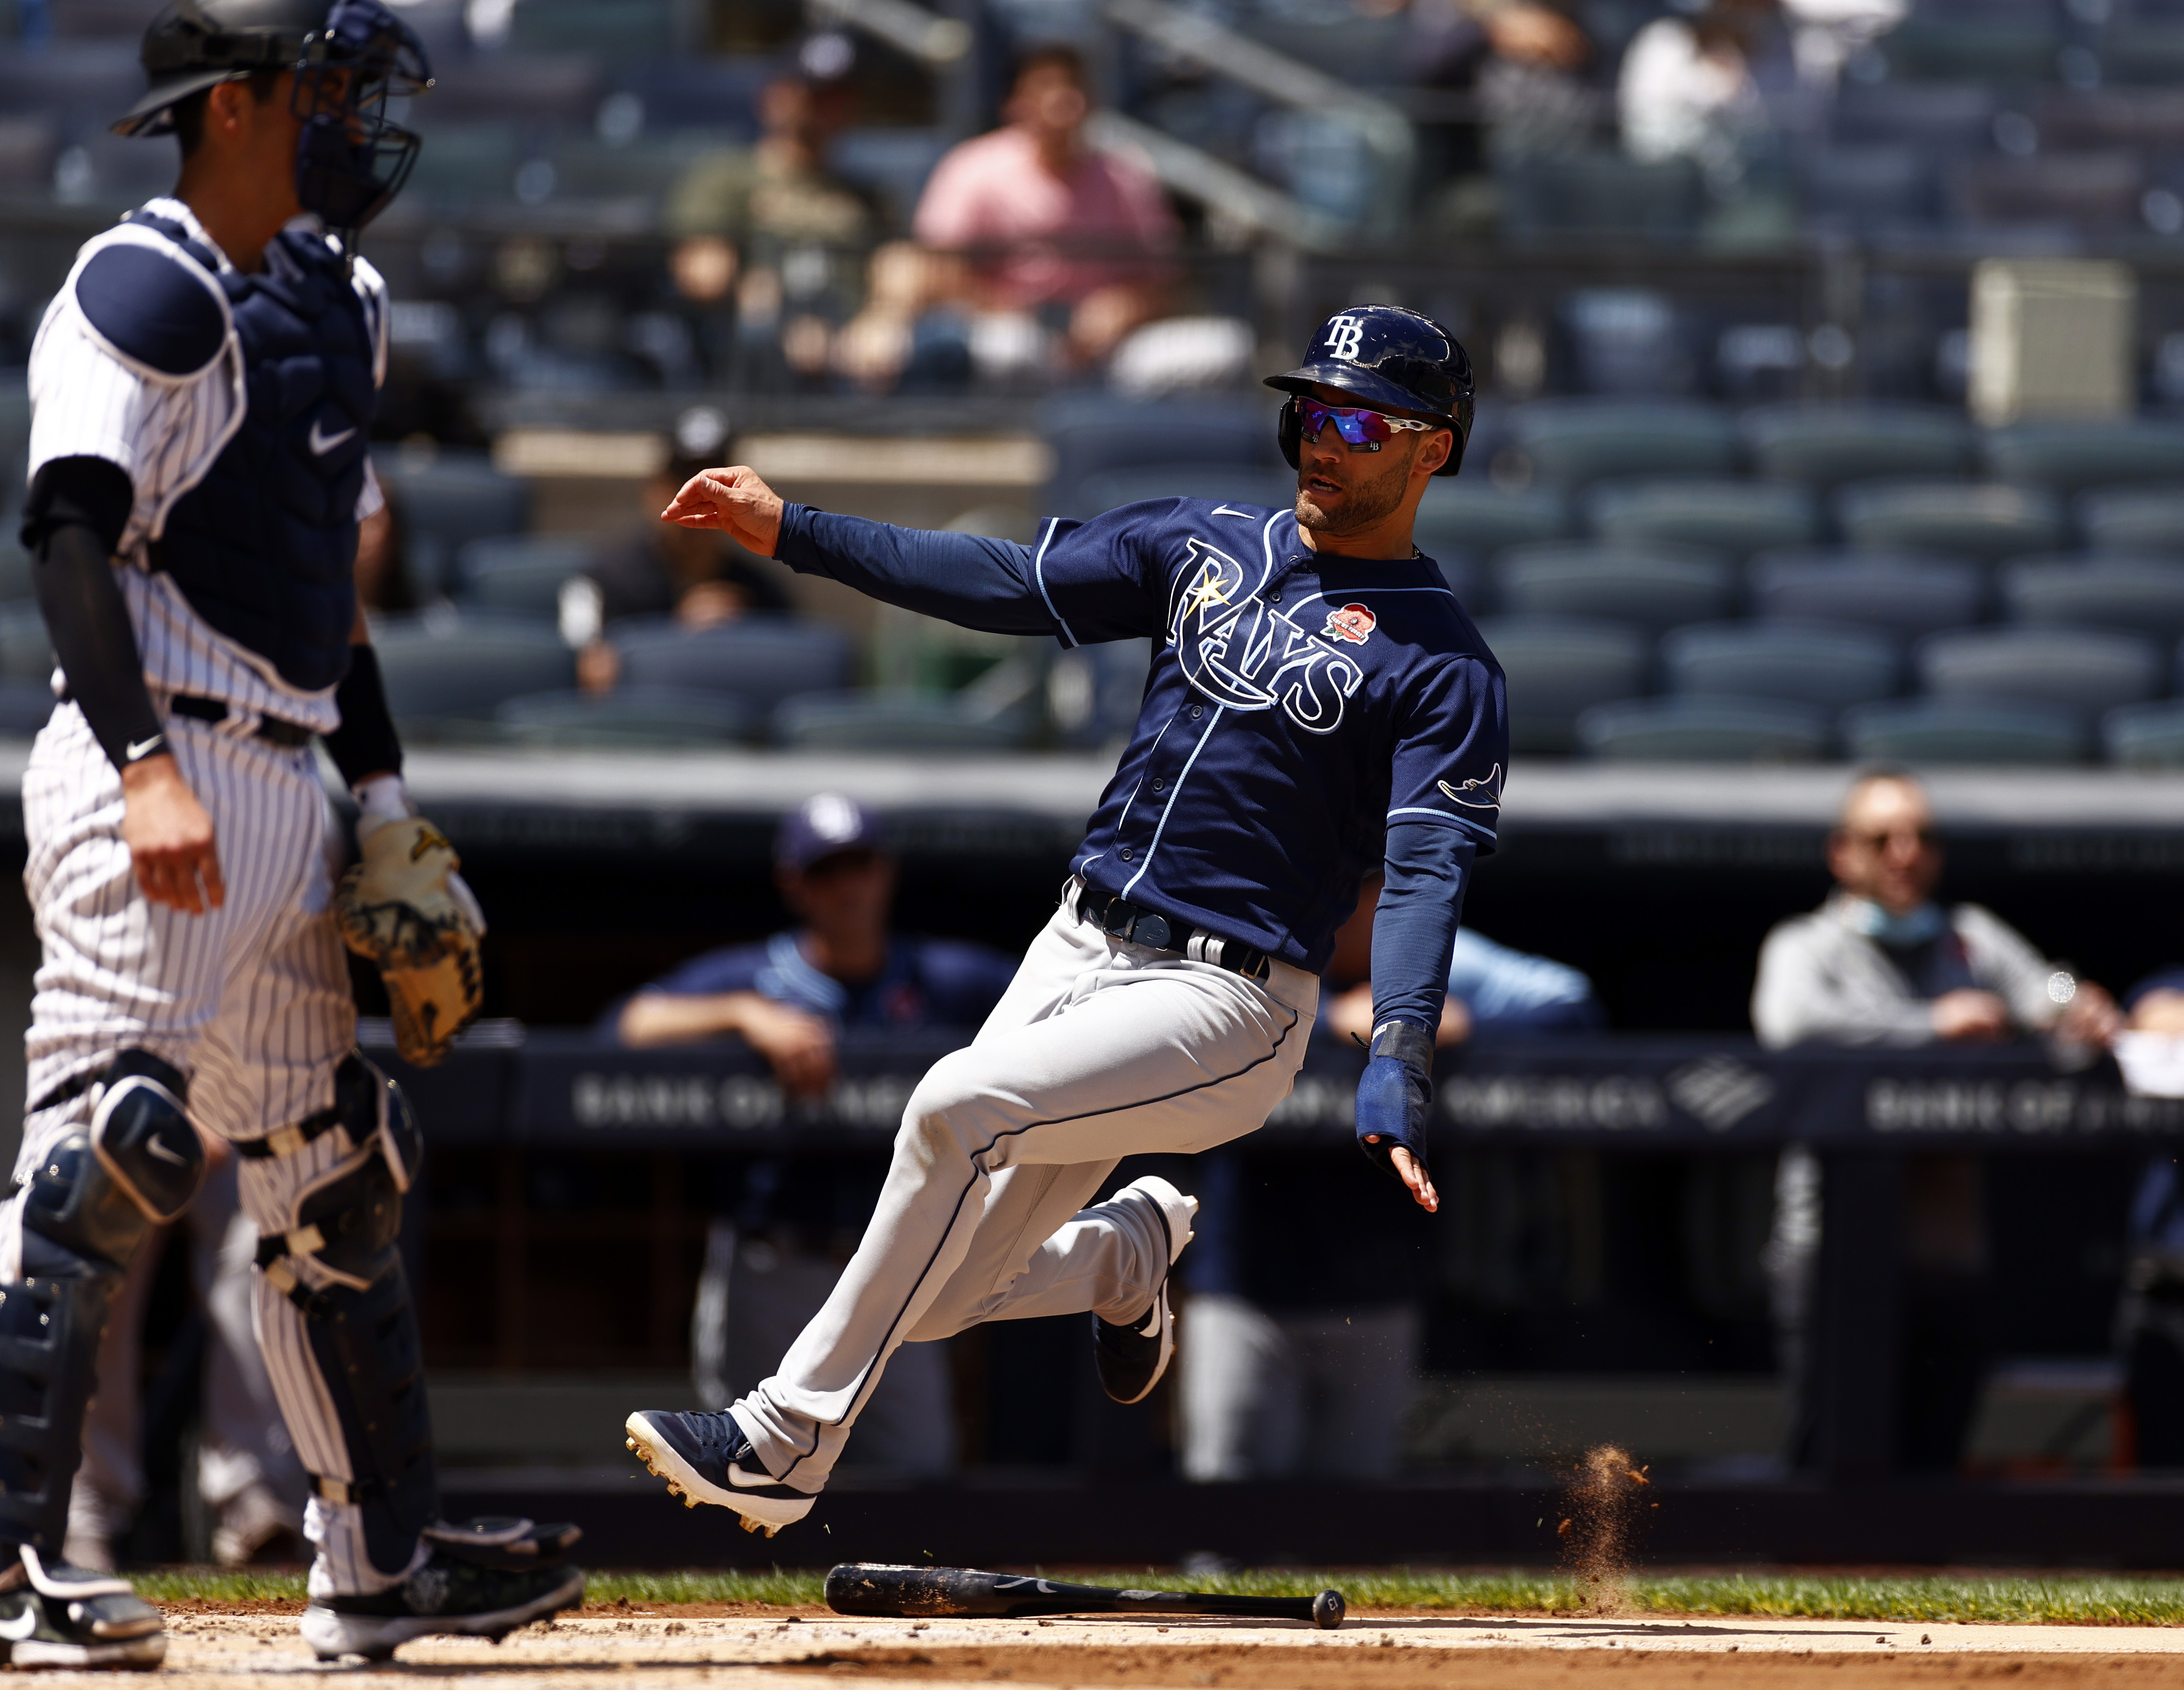 Kyle Higashioka's big day at the plate helps pace Yankees 